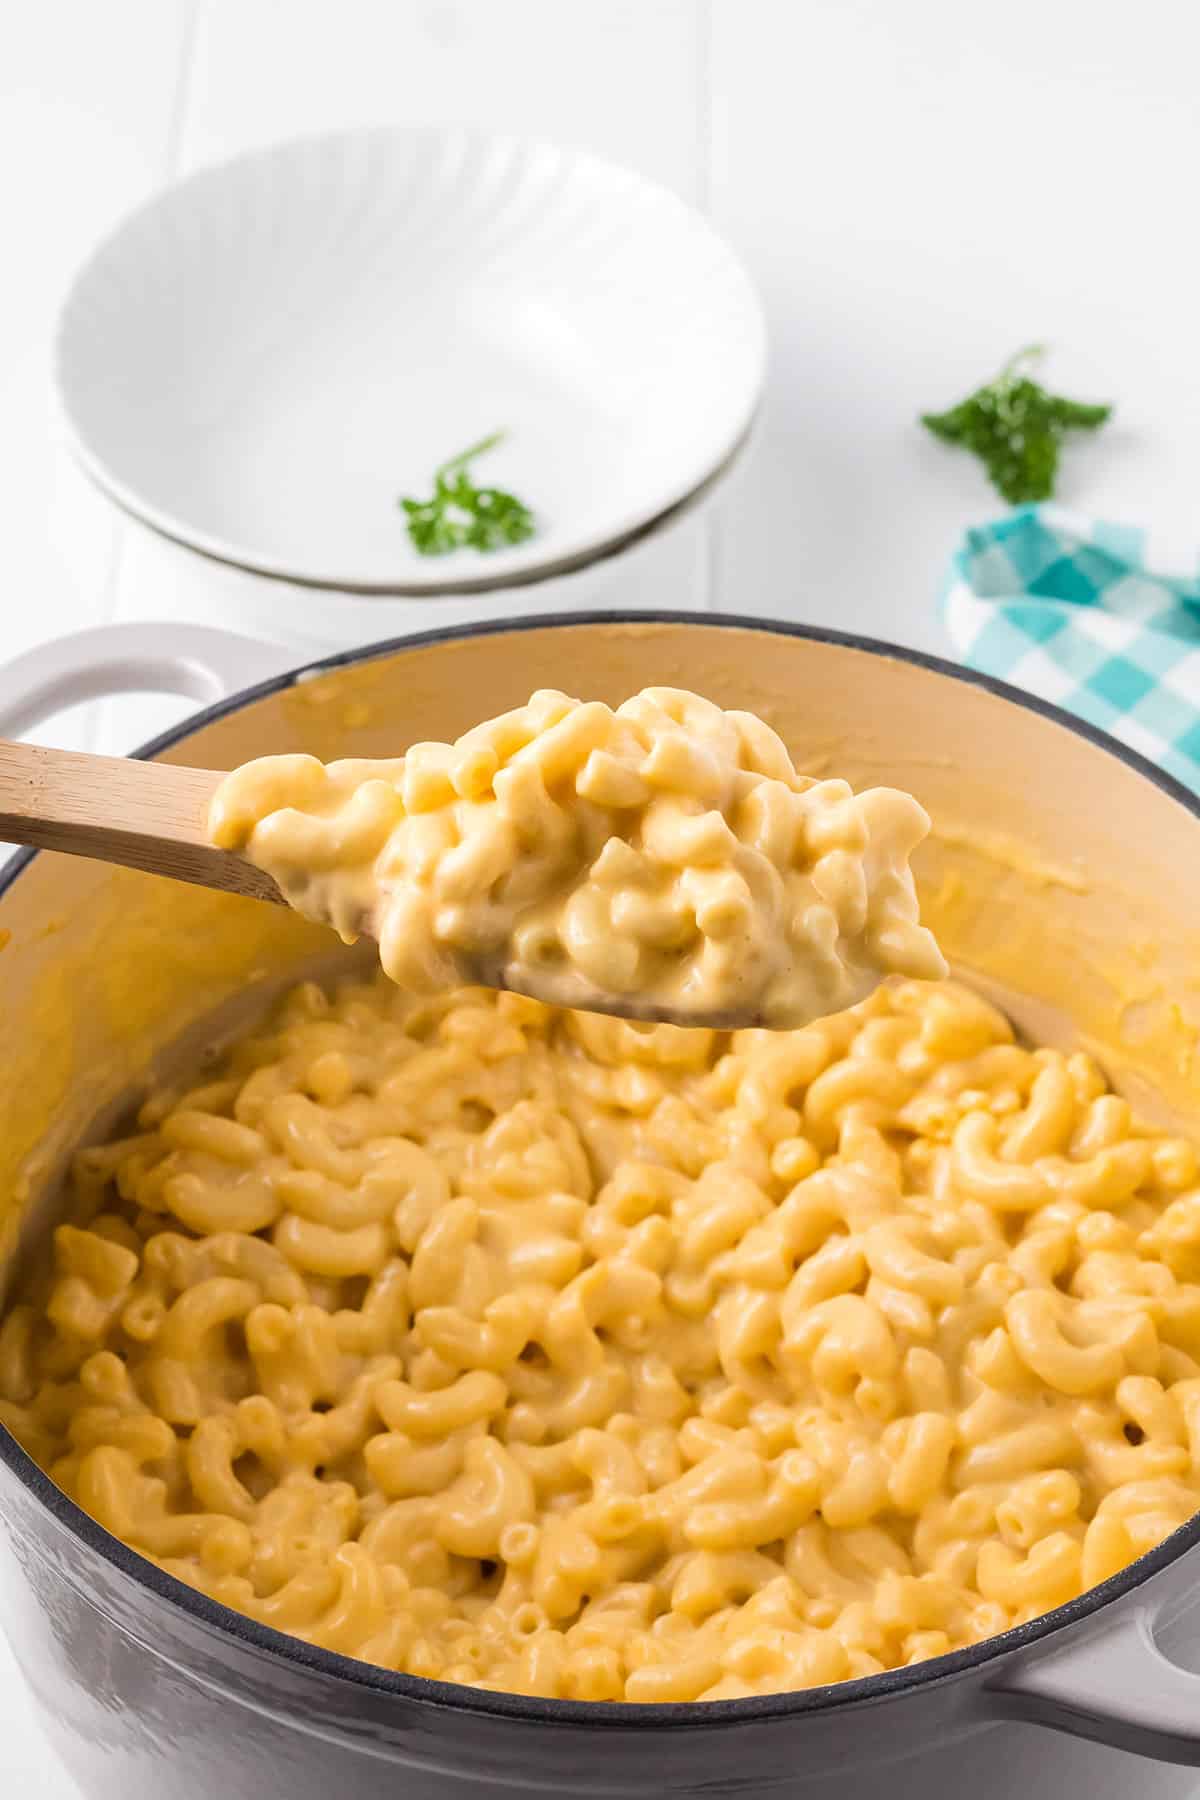 A Dutch oven filled with macaroni and cheese.